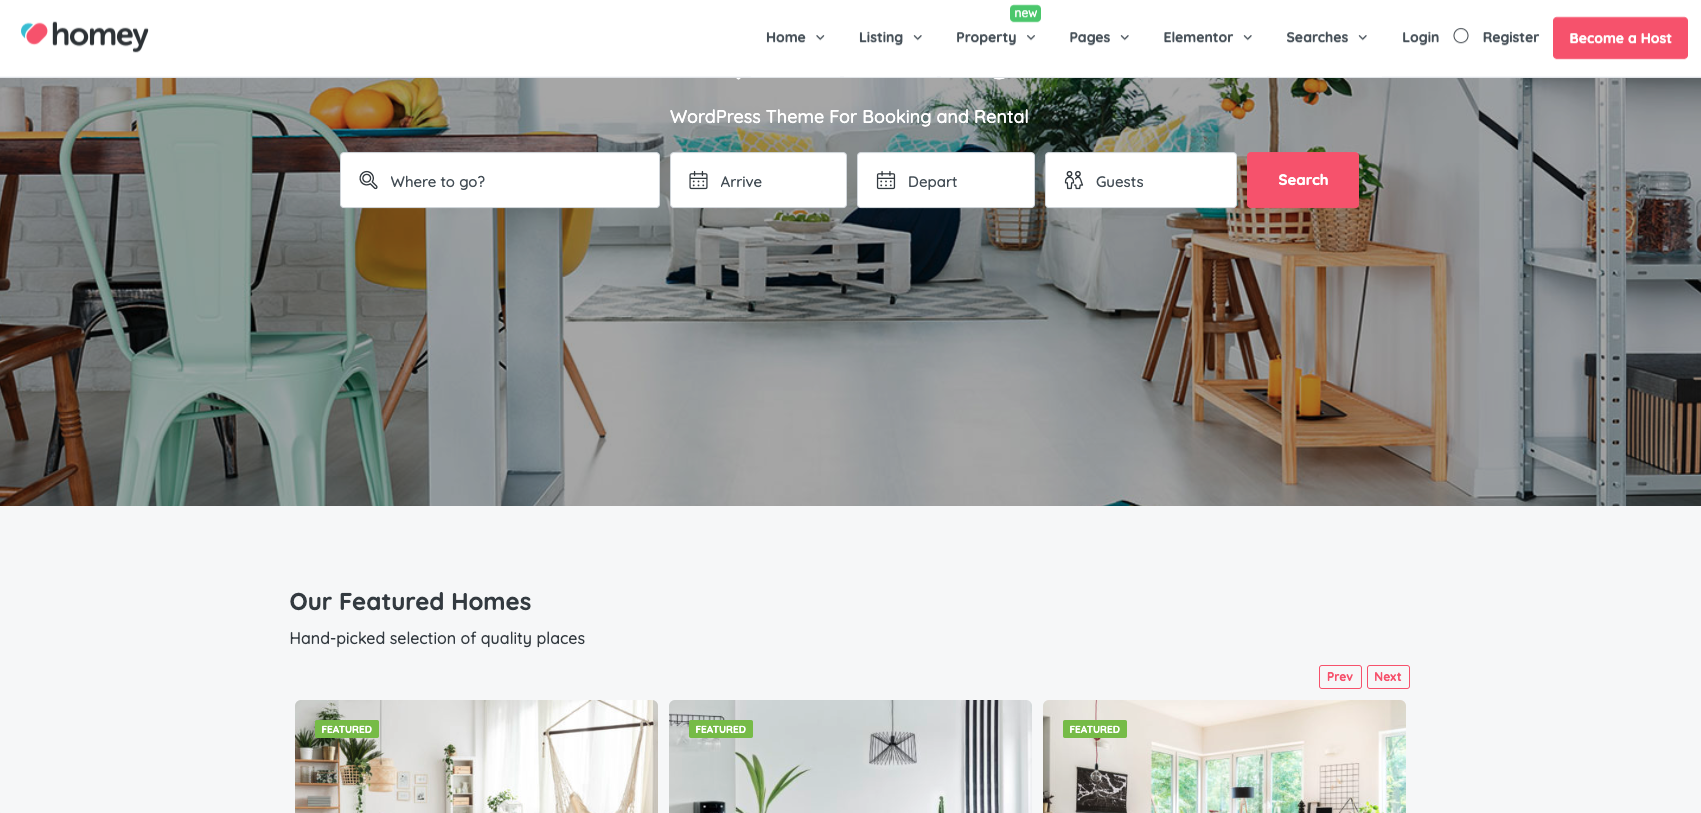 Homey website templates for short-term vacation rentals